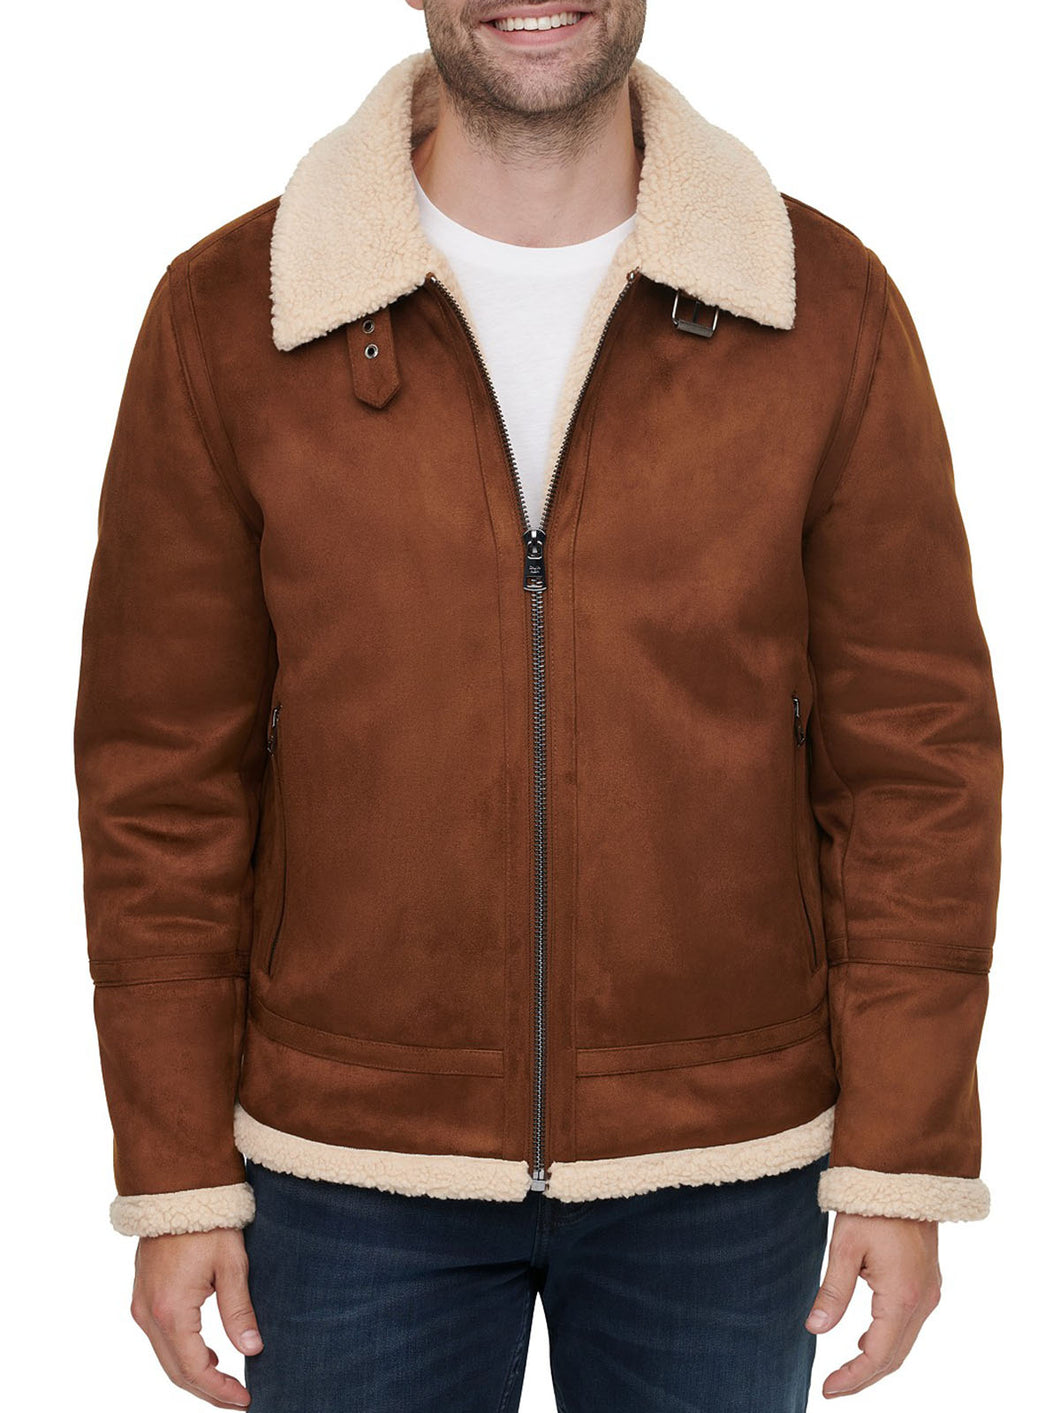 Mens Faux Leather Shearling Jacket